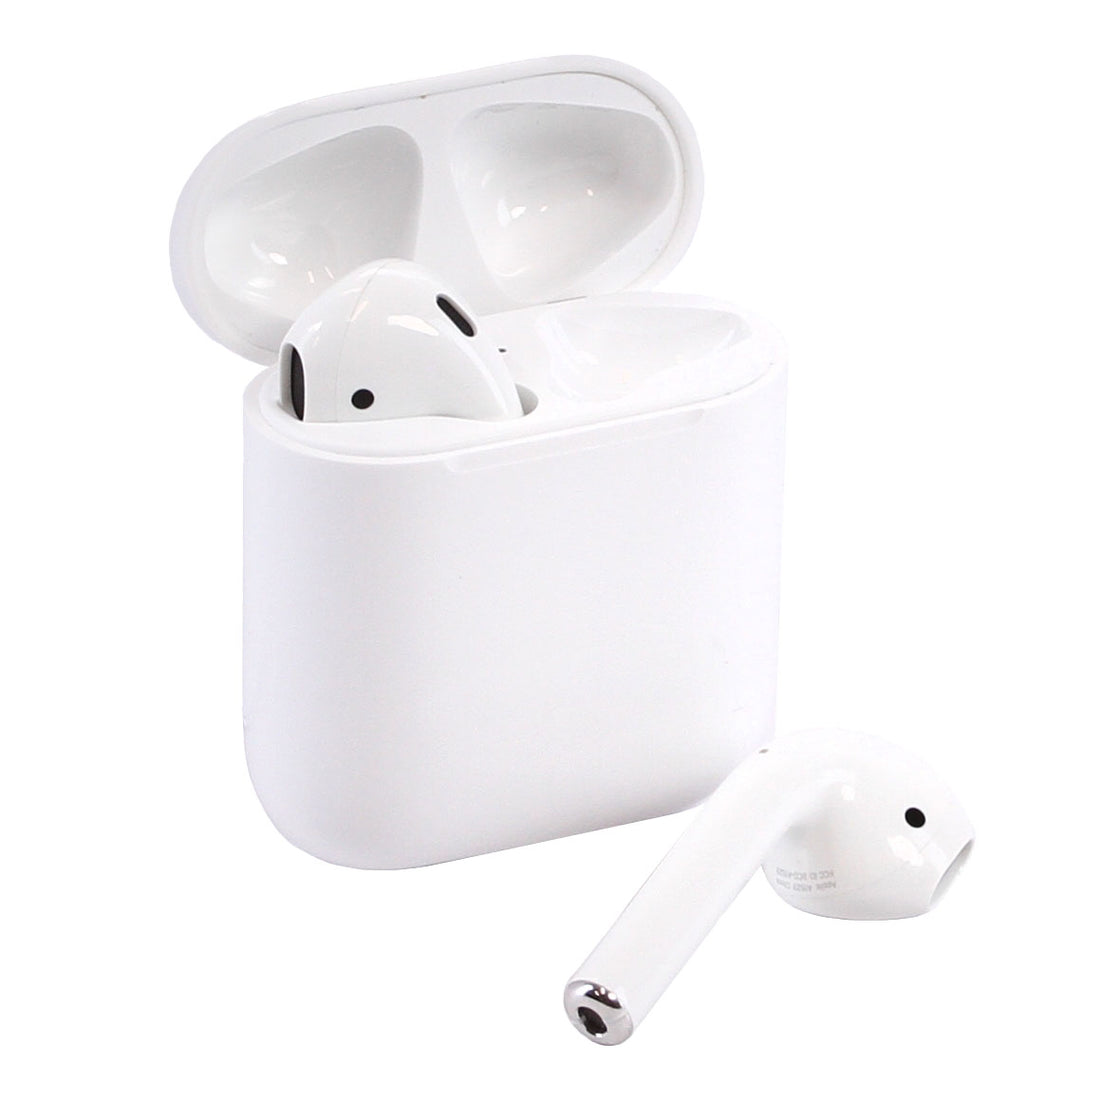 Apple AirPods 2 with Wireless Charging Case &amp; MFI Cable - White (Refurbished)